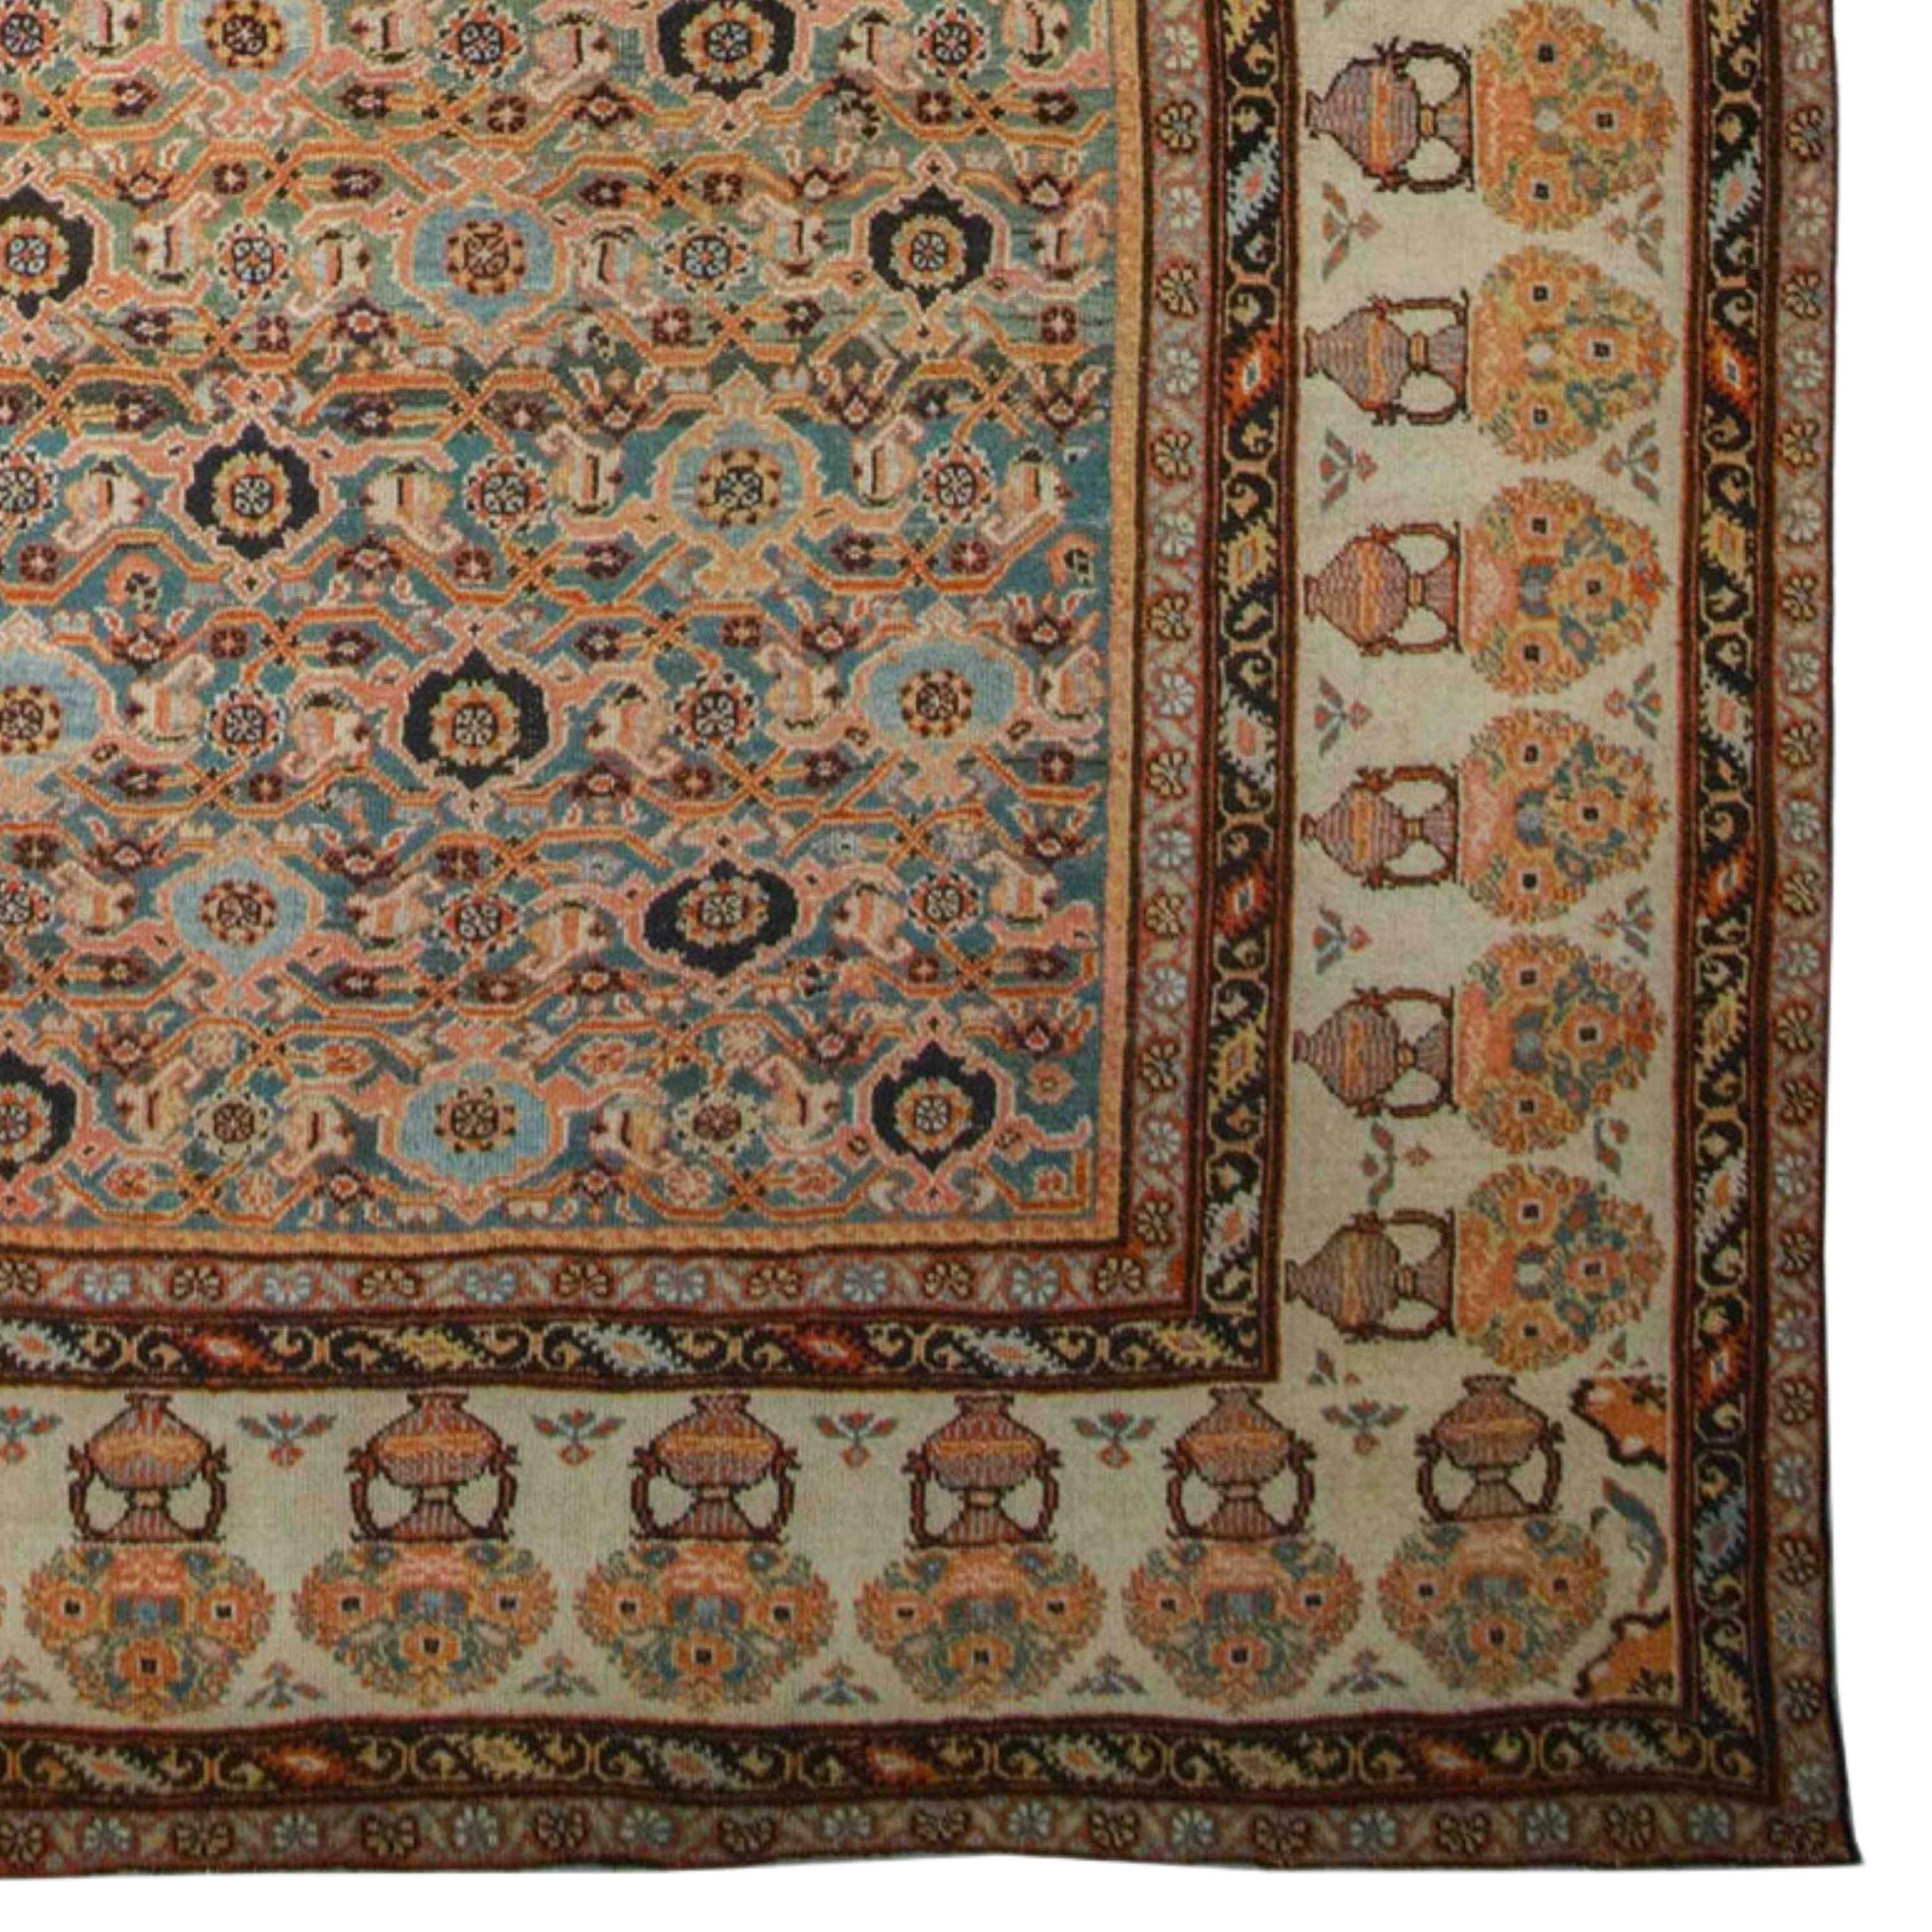 Wool Antique Mahal Carpet - Late of 19th Century Mahal Rug, Antique Rug For Sale